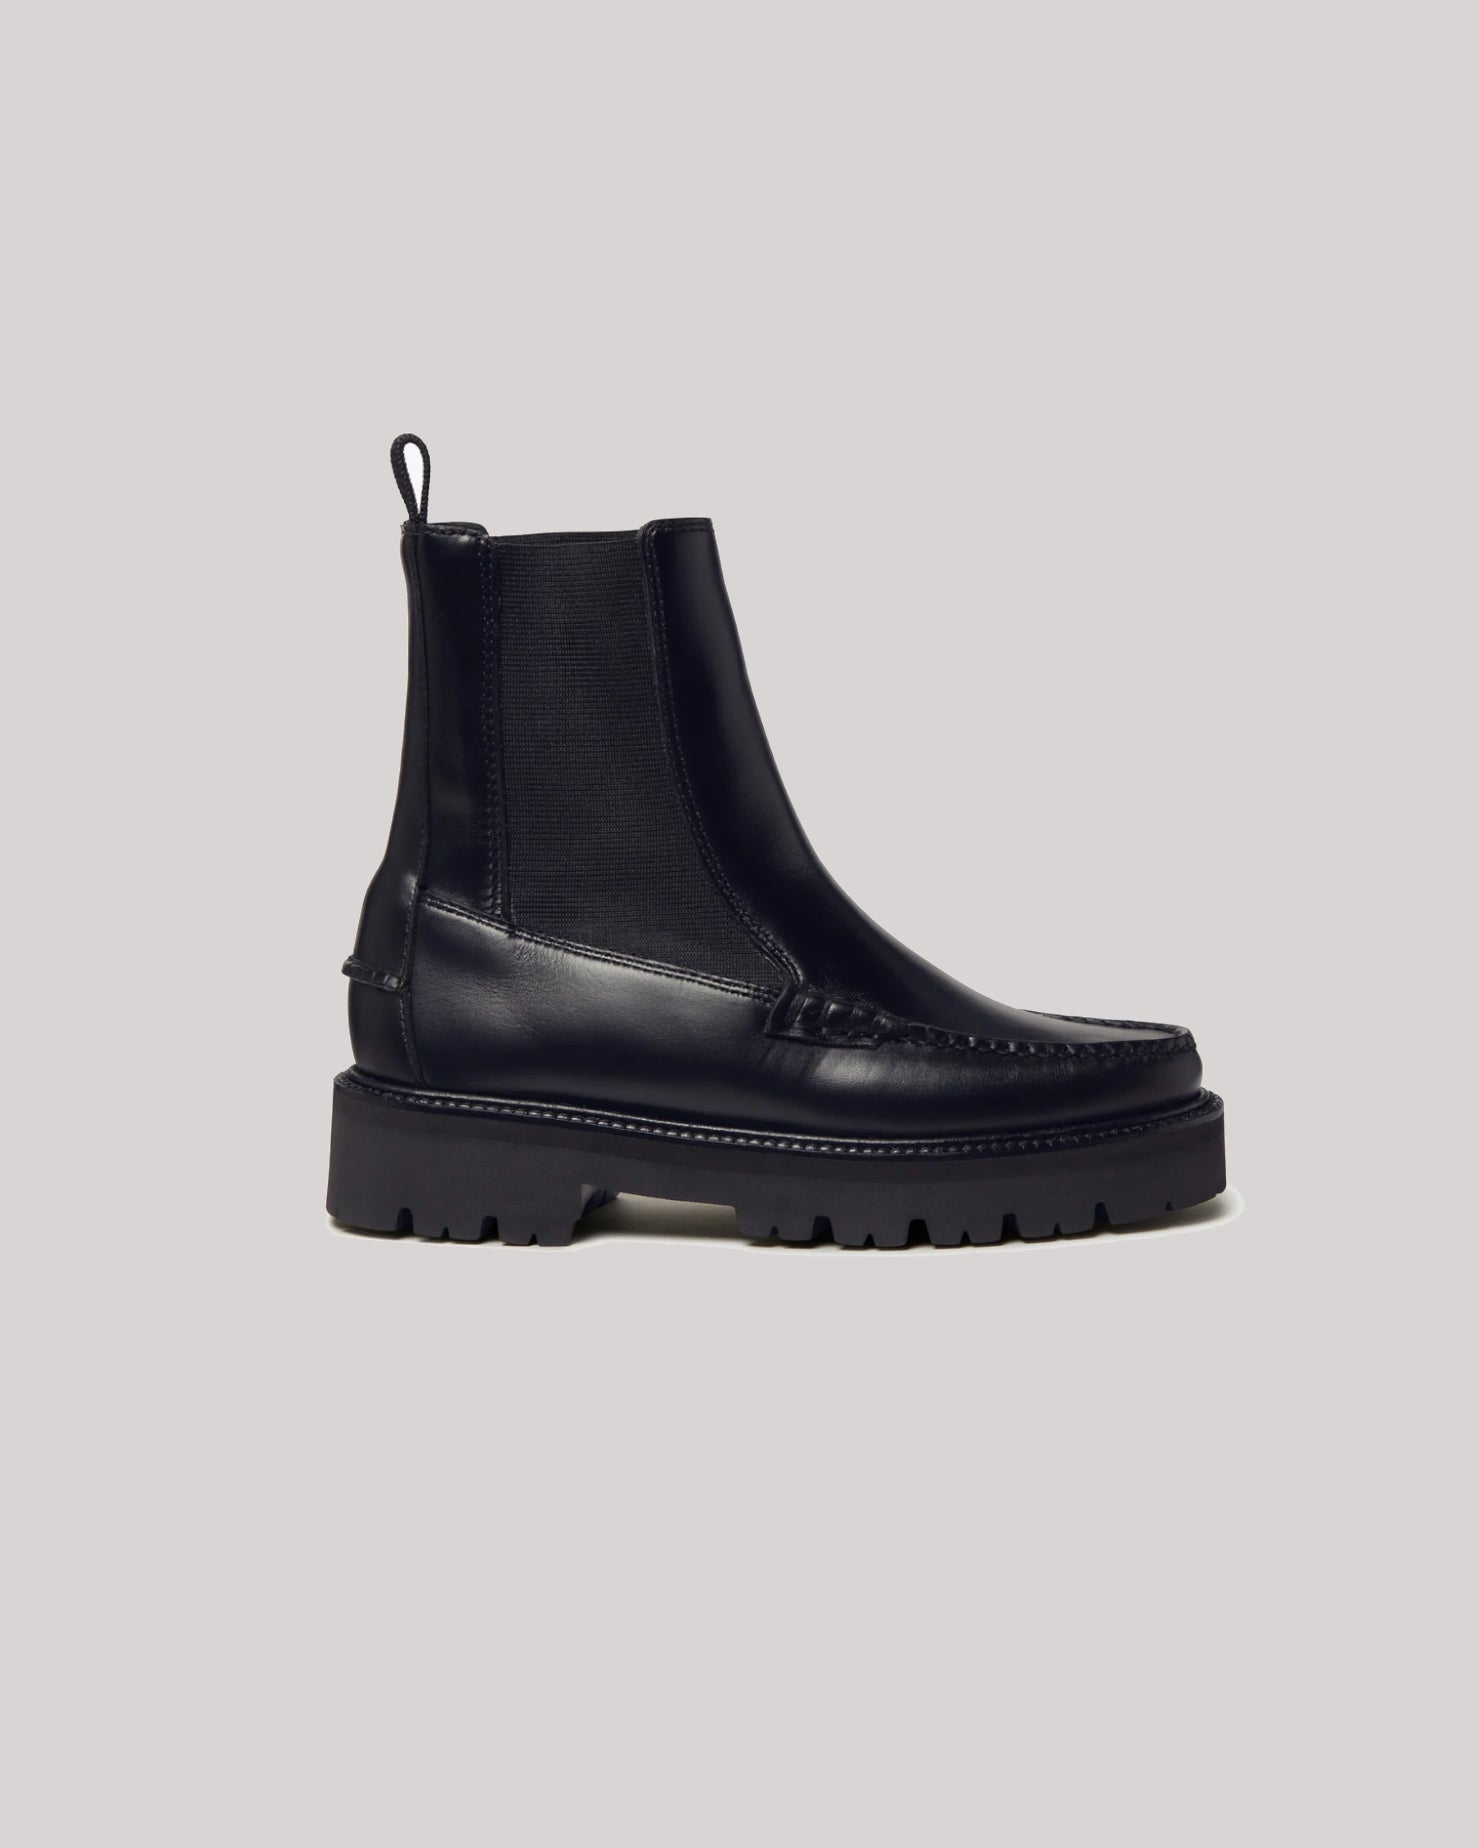 G.H Bass & Co. Weejuns Black Chelsea Boots